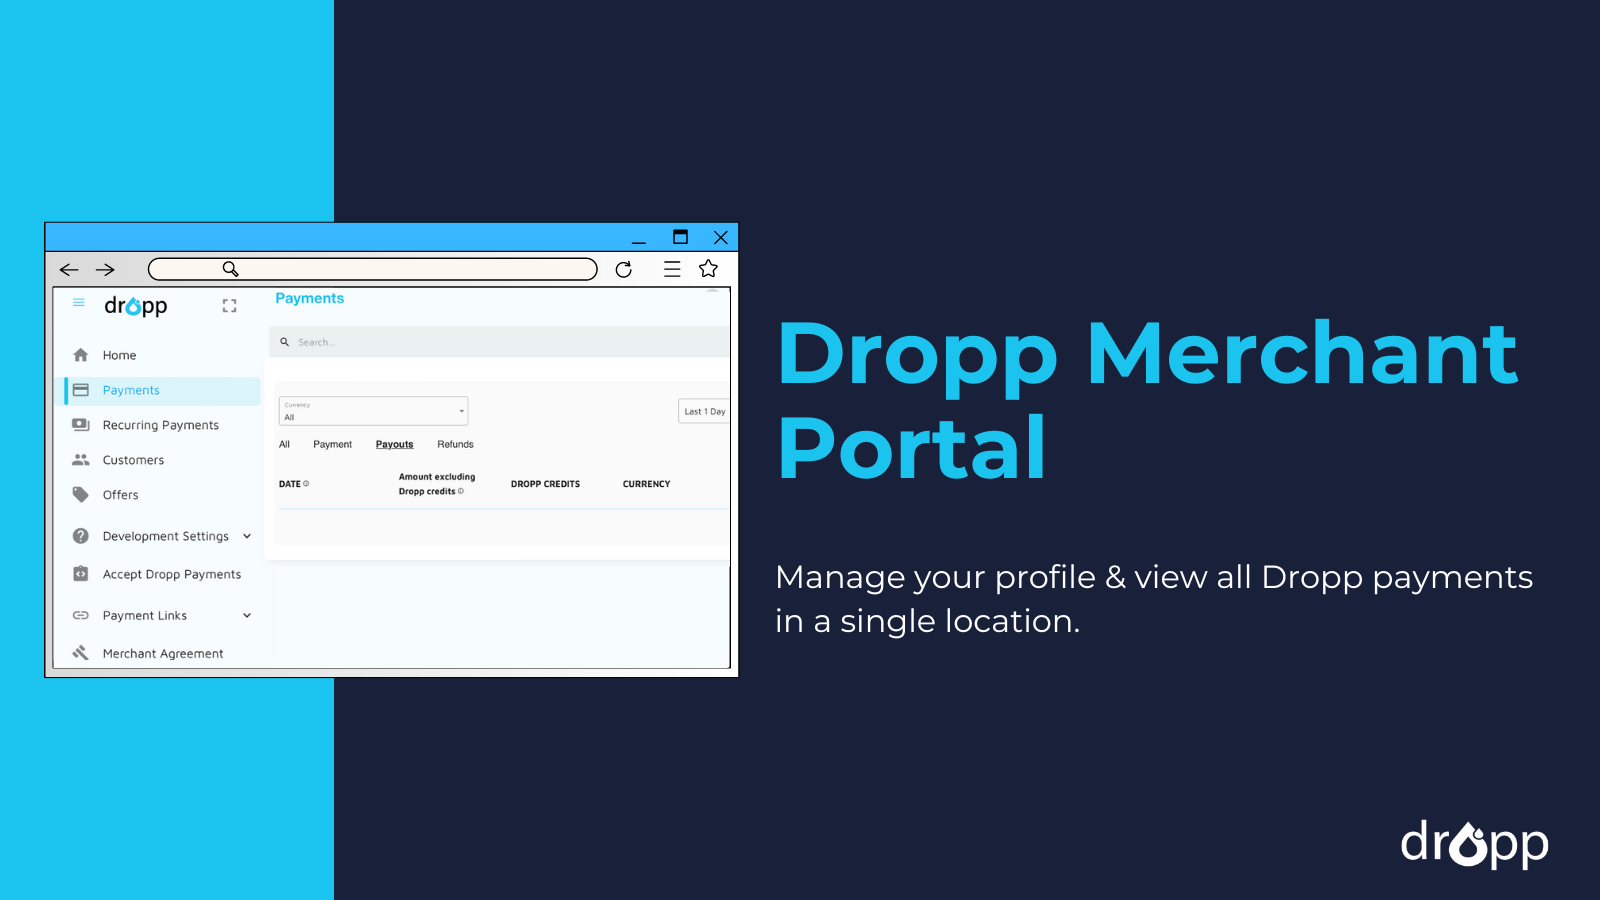 Dropp Merchant Portal for extended functionality